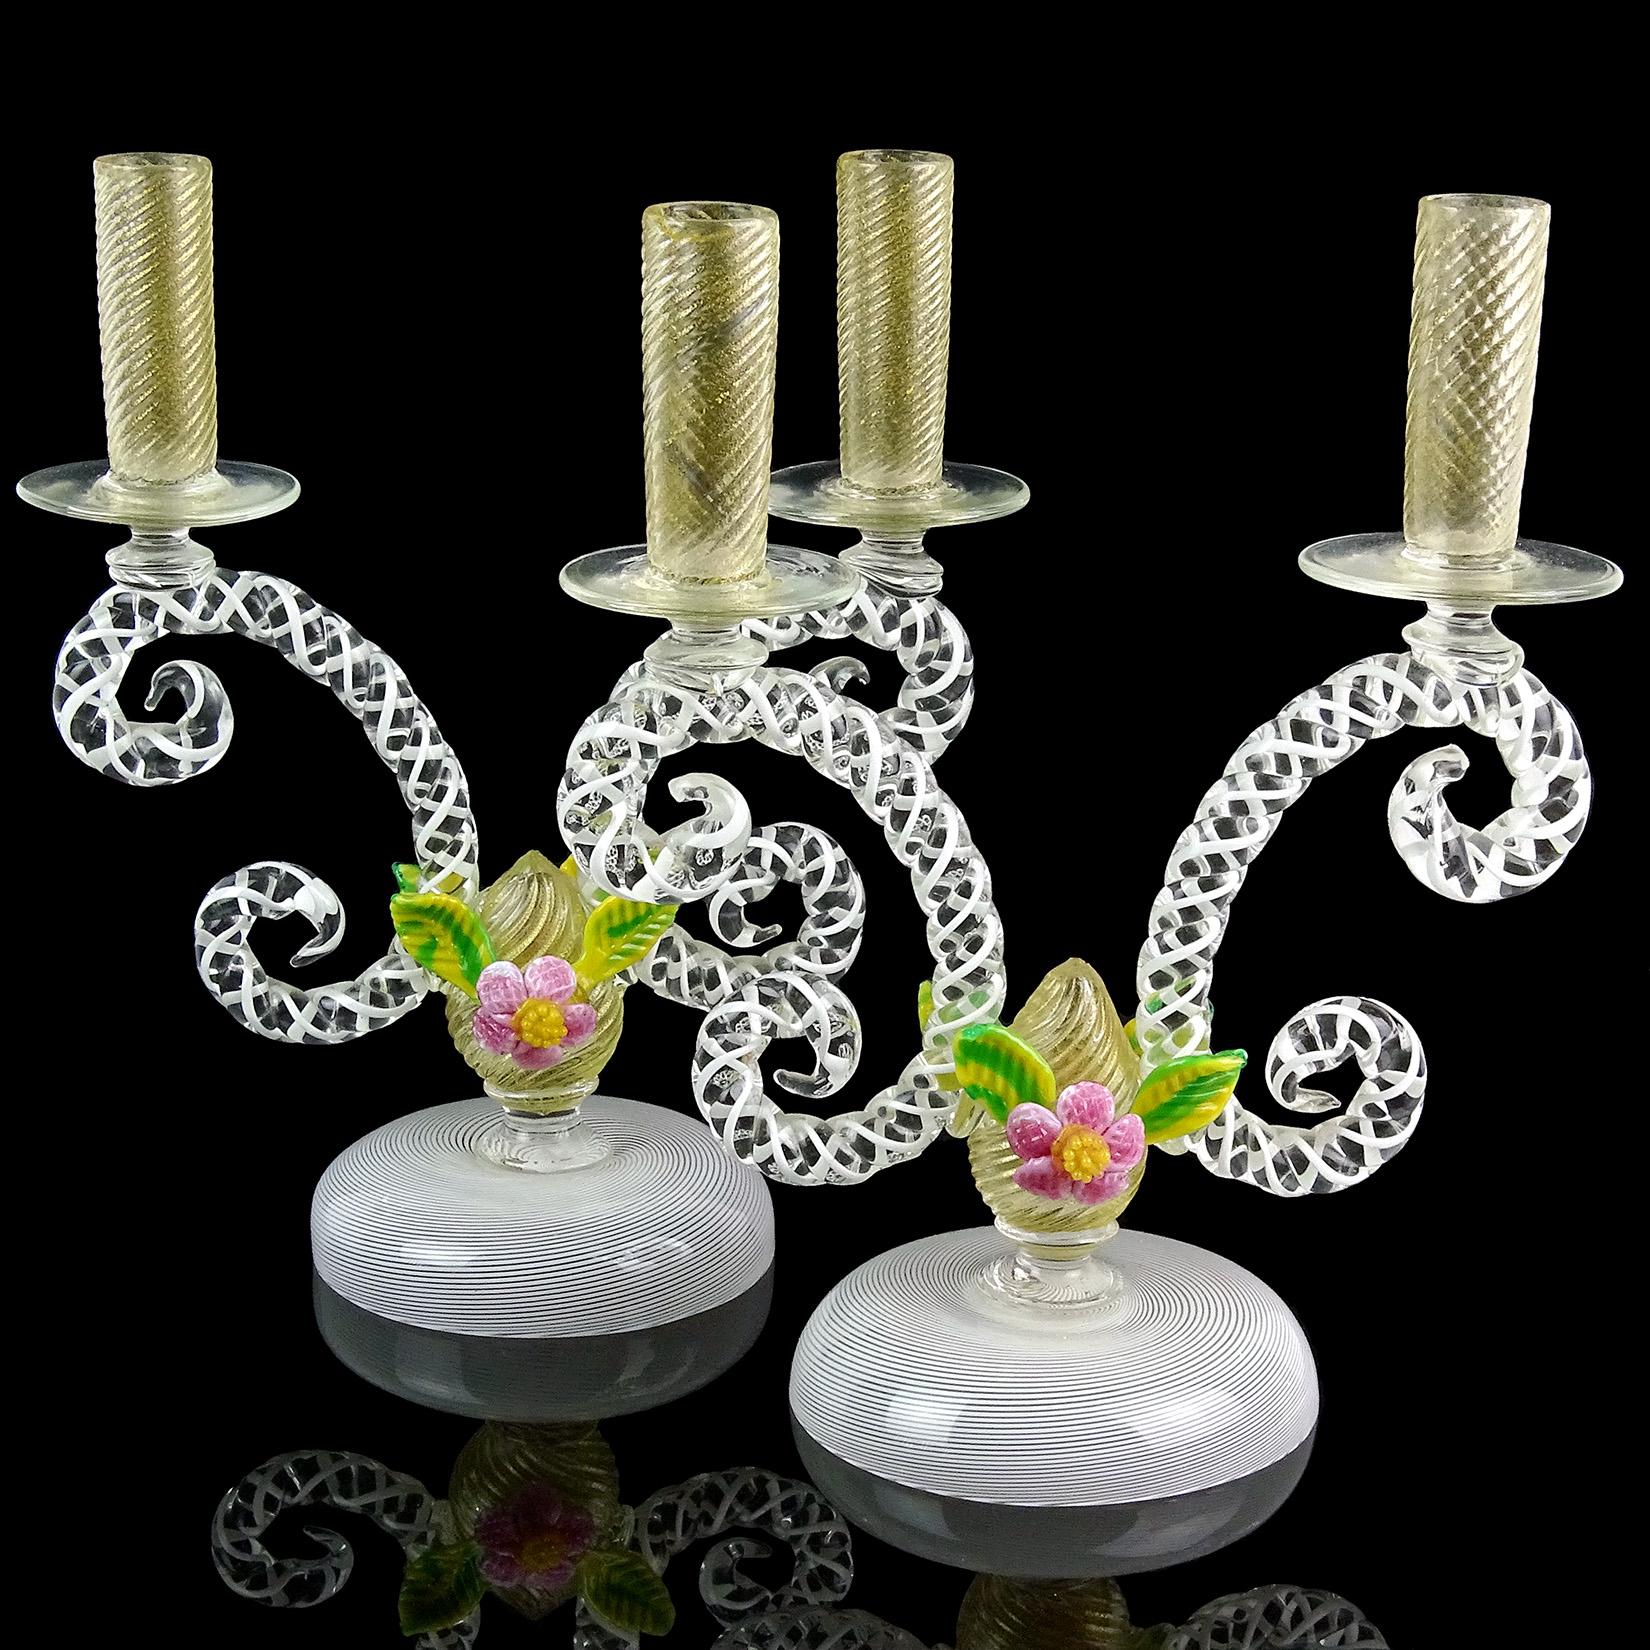 Gorgeous pair of large antique Murano hand blown Filigrana ribbons with gold flecks and flower accents Italian art glass double candlesticks / candelabra. The holders have scroll decoration arms, with white ribbons intertwined, center with gold leaf